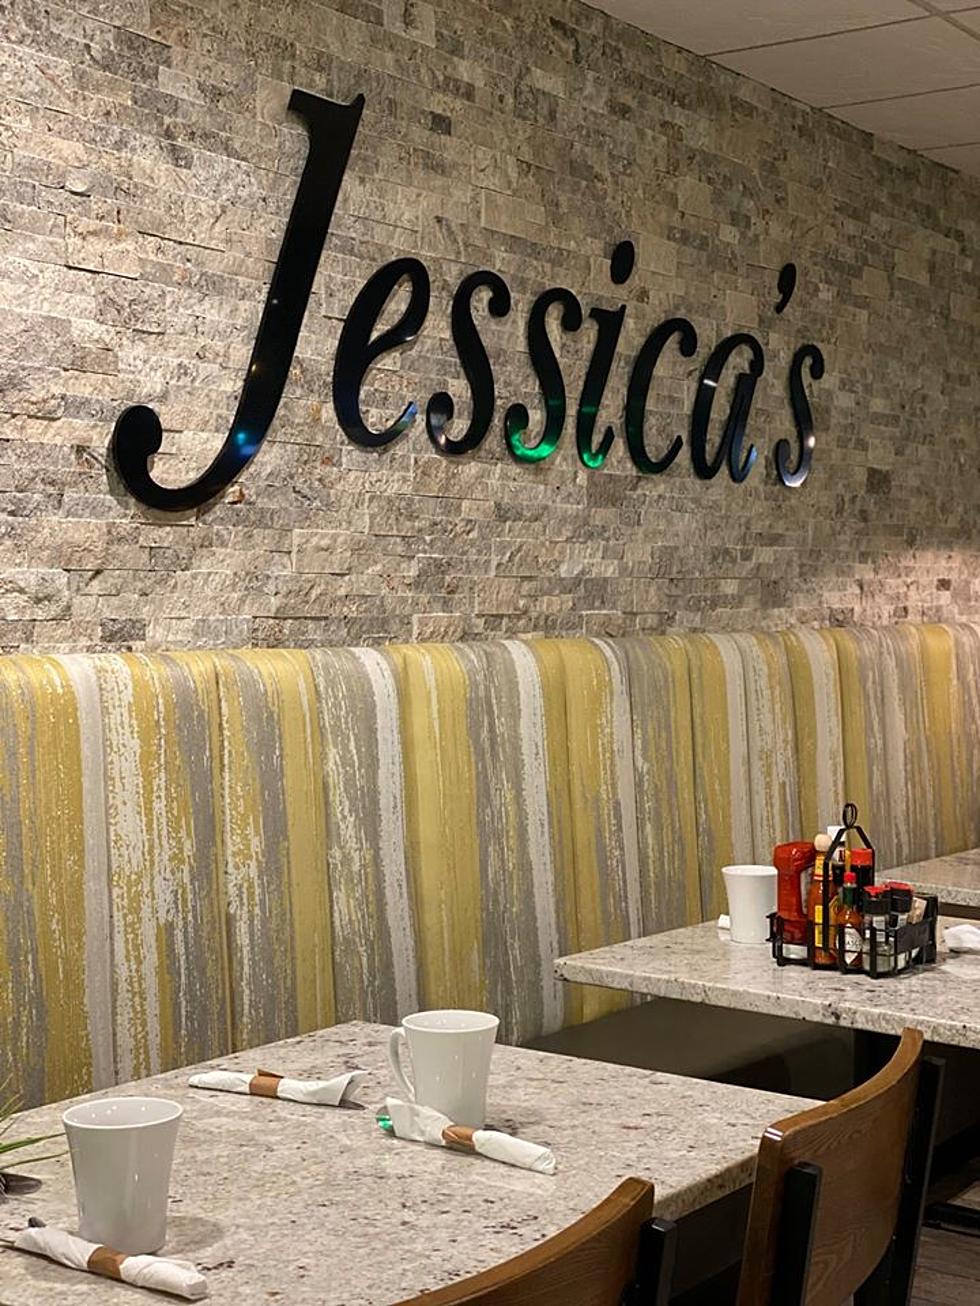 Jessica’s in Roscoe Will Deliver Roscoe, Rockton, South Beloit, Machesney Park, (Details)